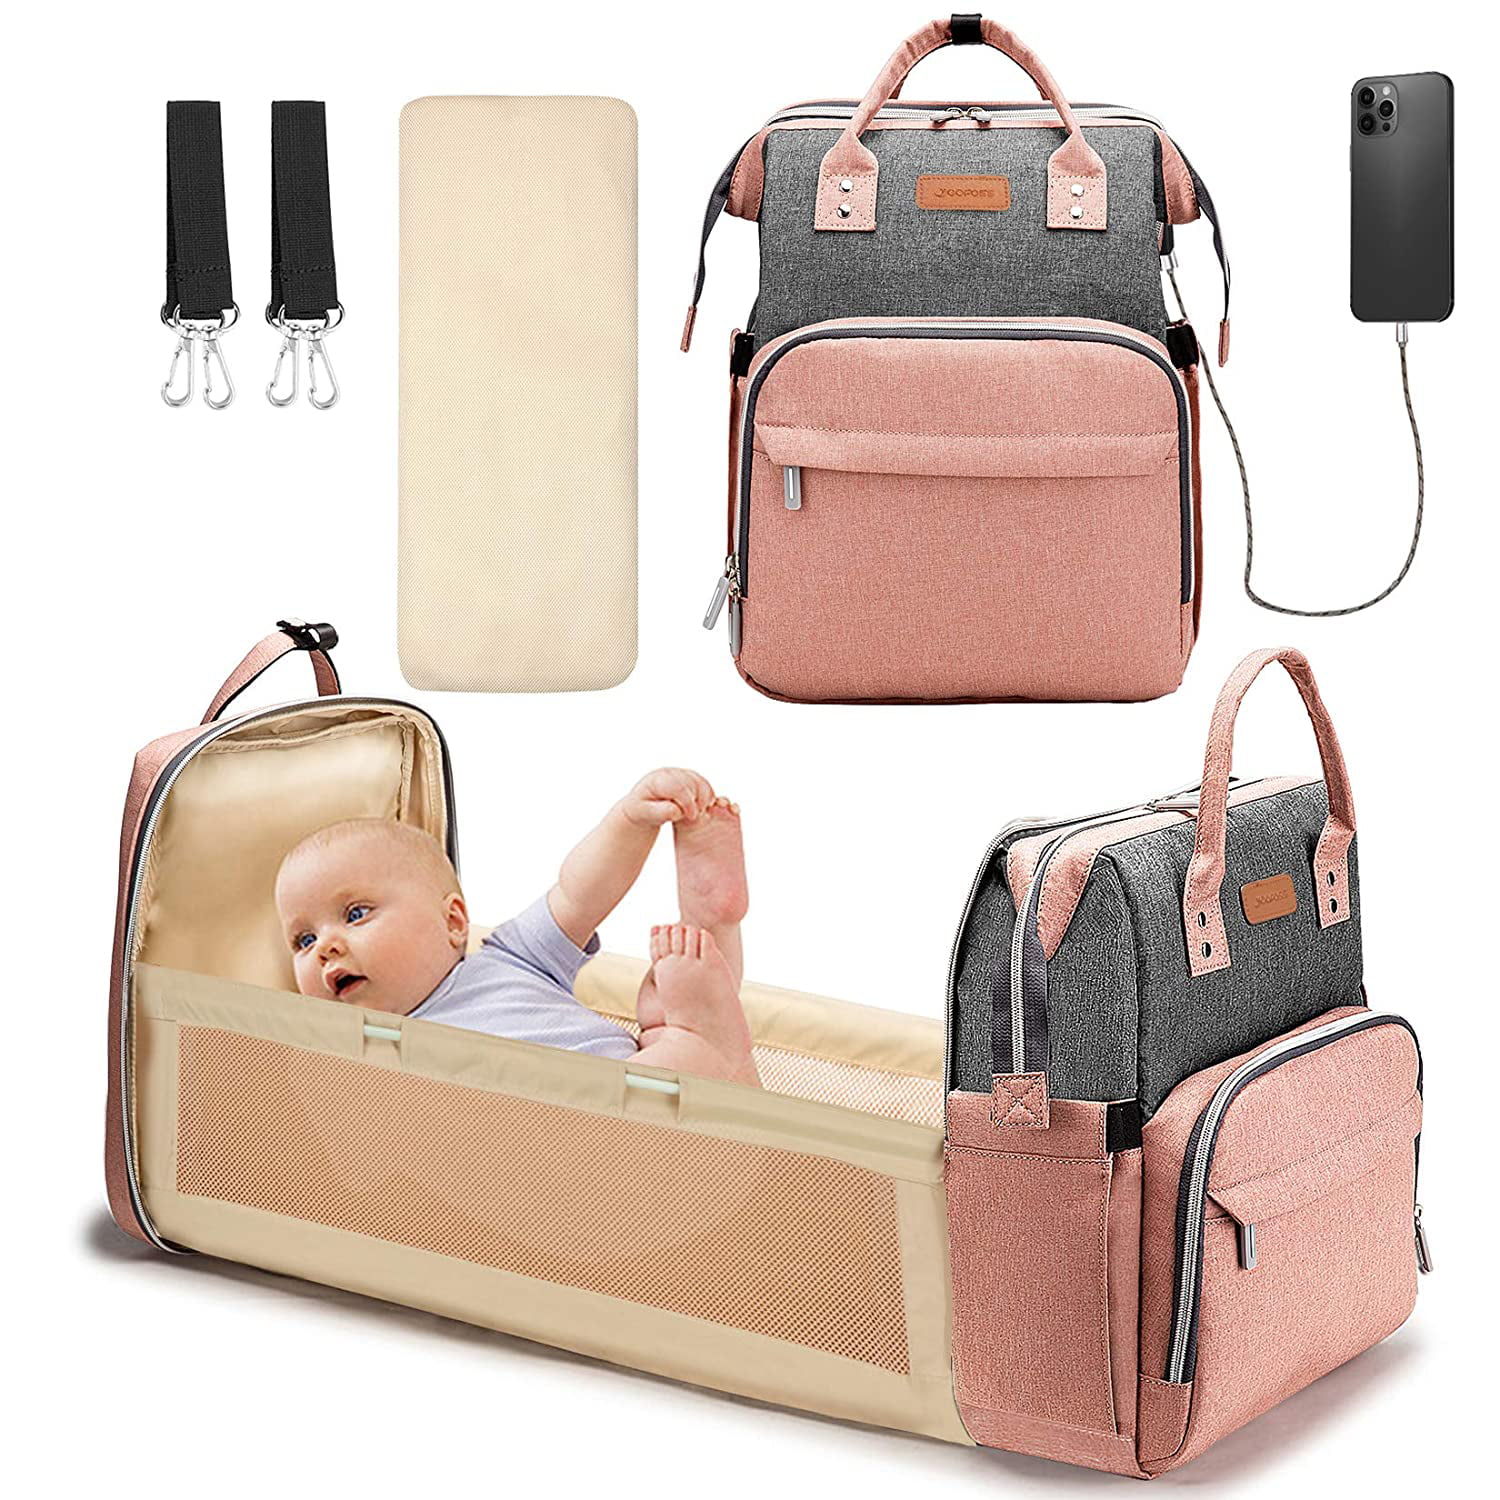 Large Capacity Babmoge Diaper Bag Backpack Unisex Waterproof Baby Bag for Boys Girls Multifunction Travel Back Pack Maternity Baby Nappy Changing Bags with Changing Pad & Stroller Straps 